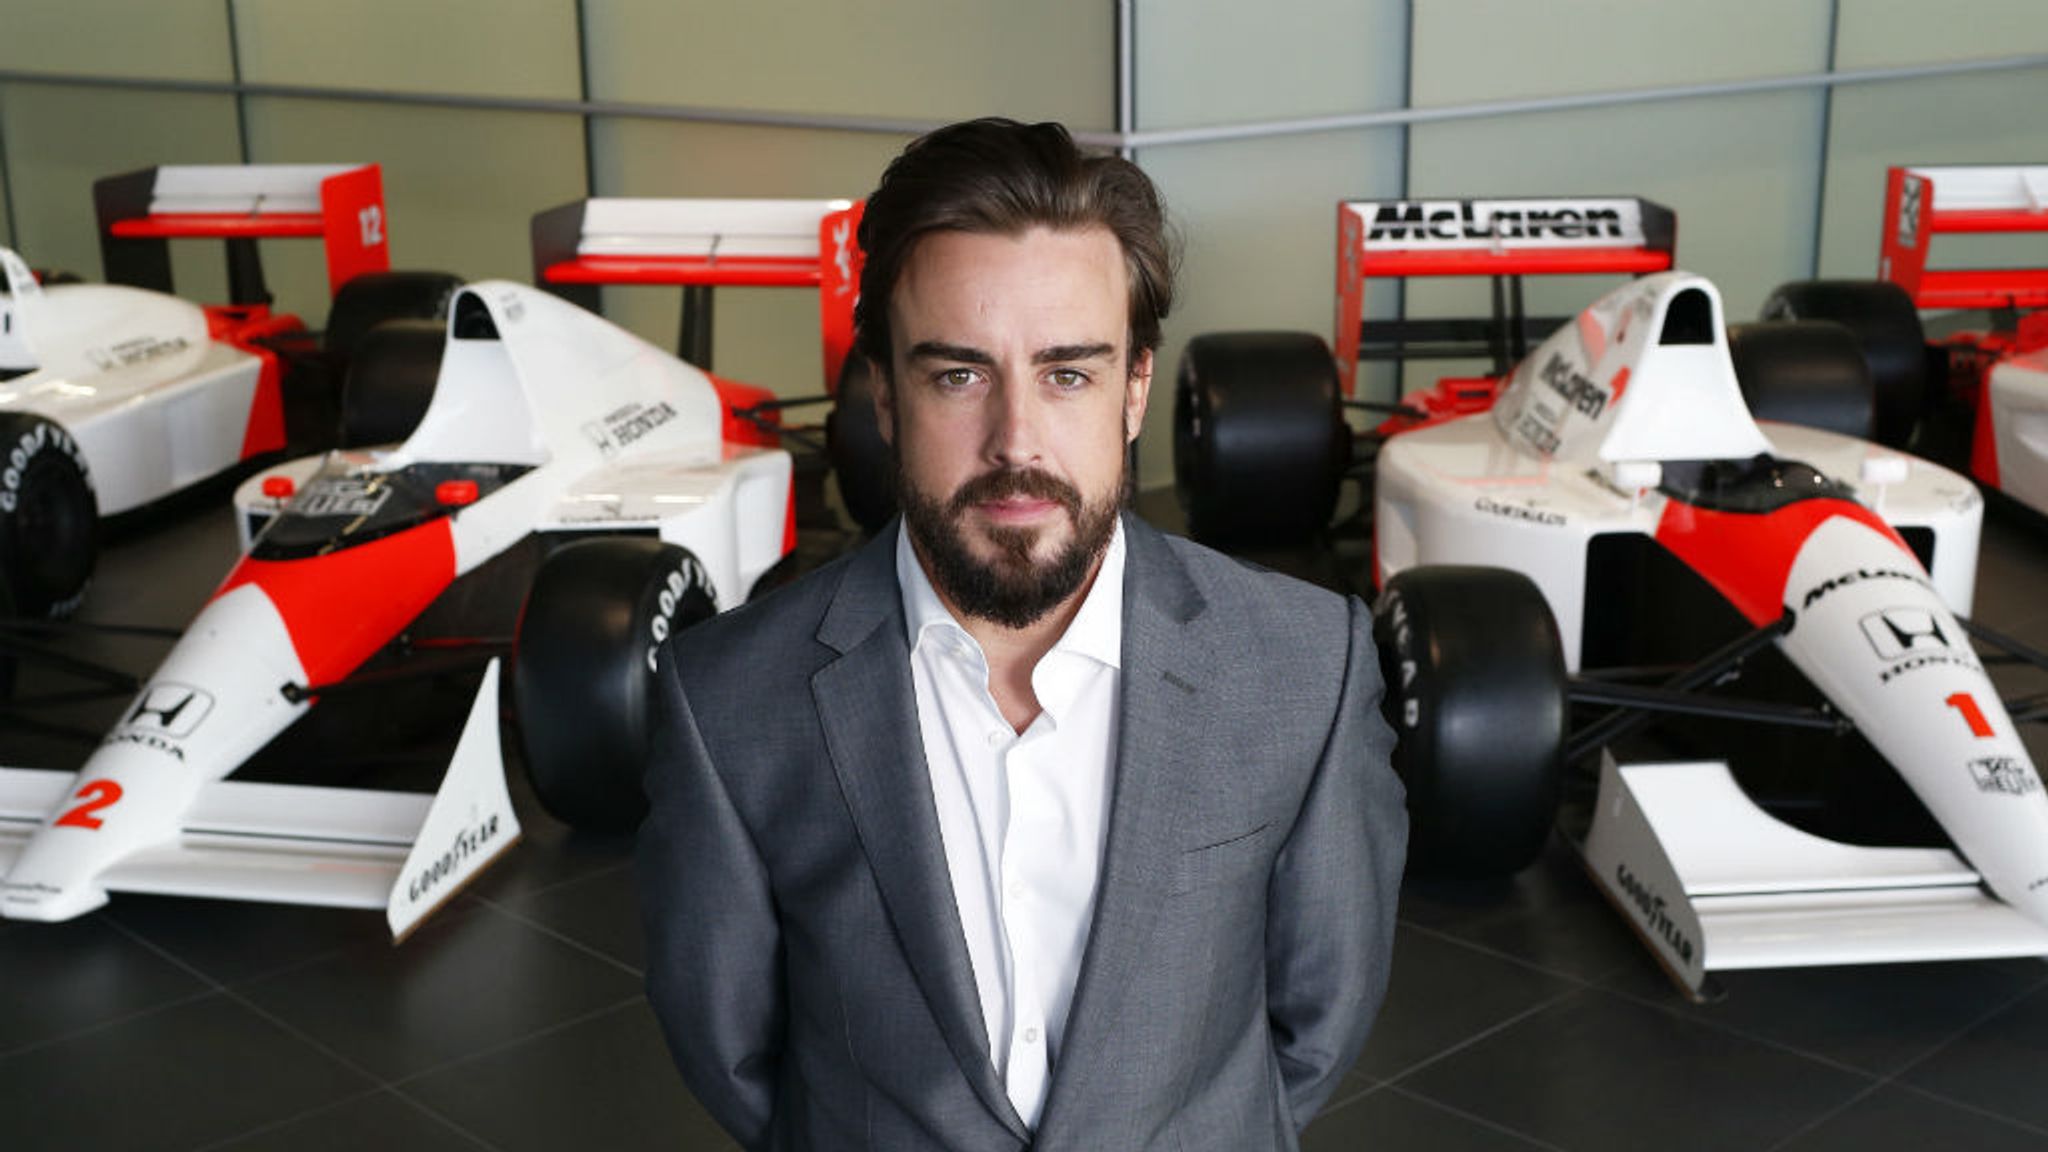 Fernando Alonso wants to end McLaren talk by signing contract